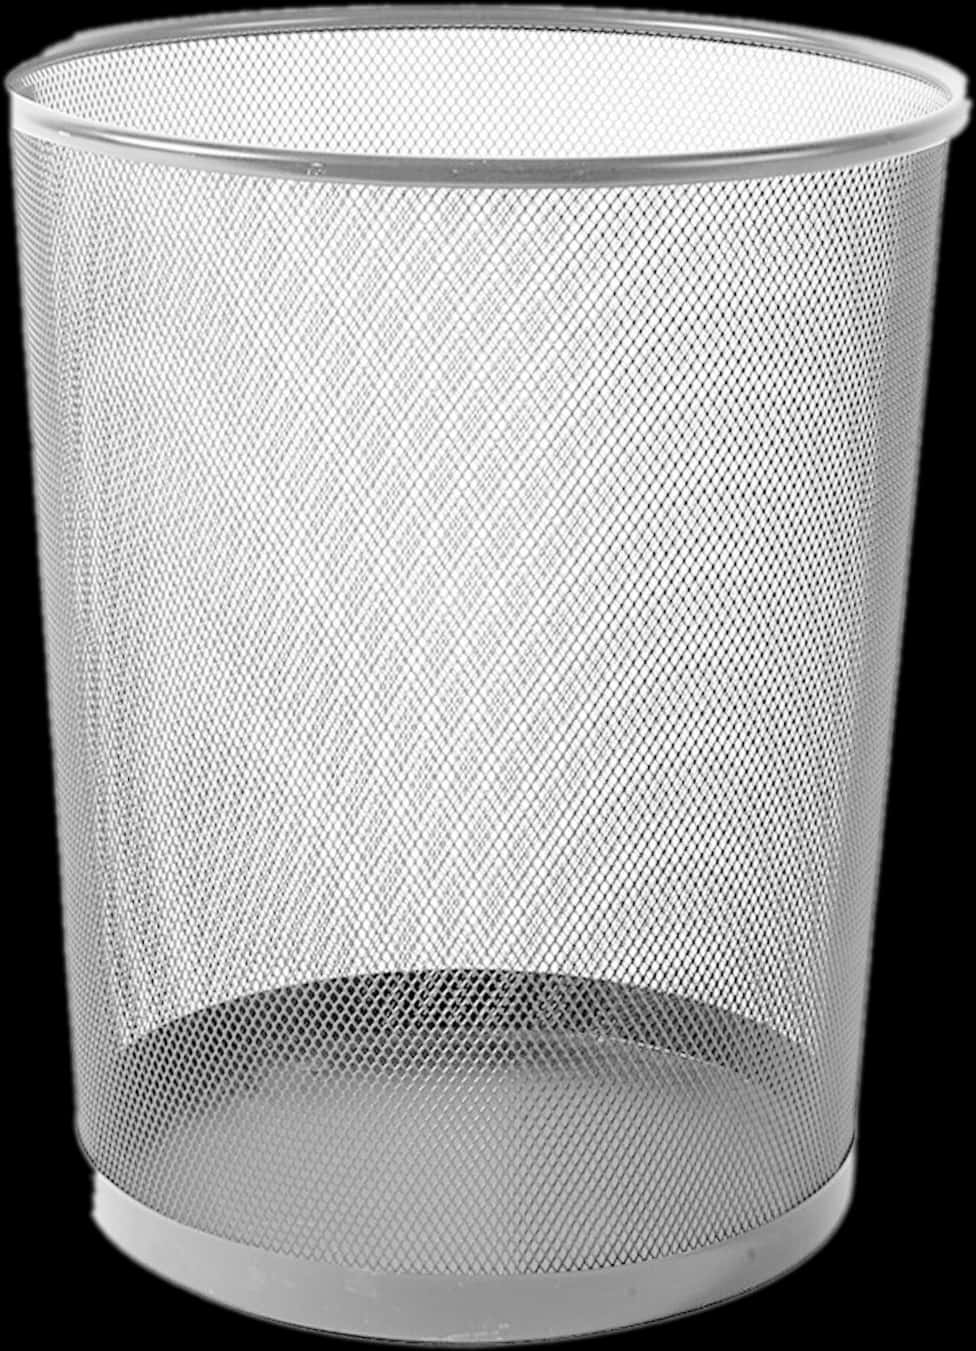 A White Trash Can With A Black Background